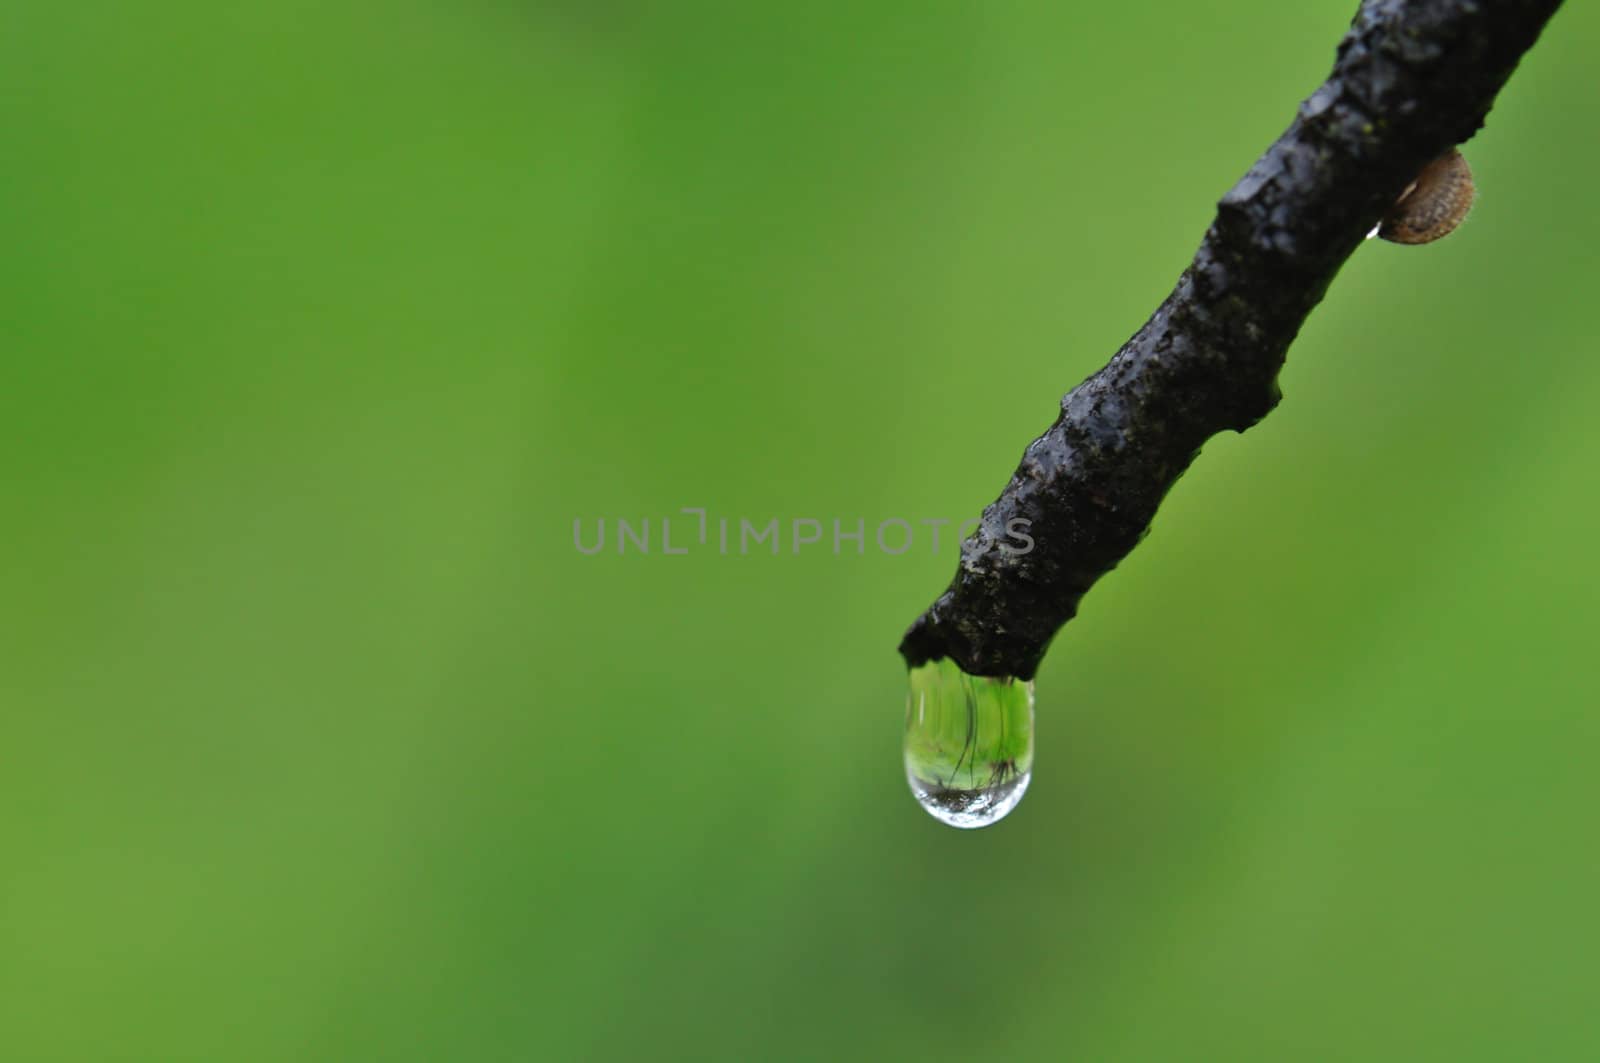 Droplet on tree branch macro. Rainy weather nature abstract background.